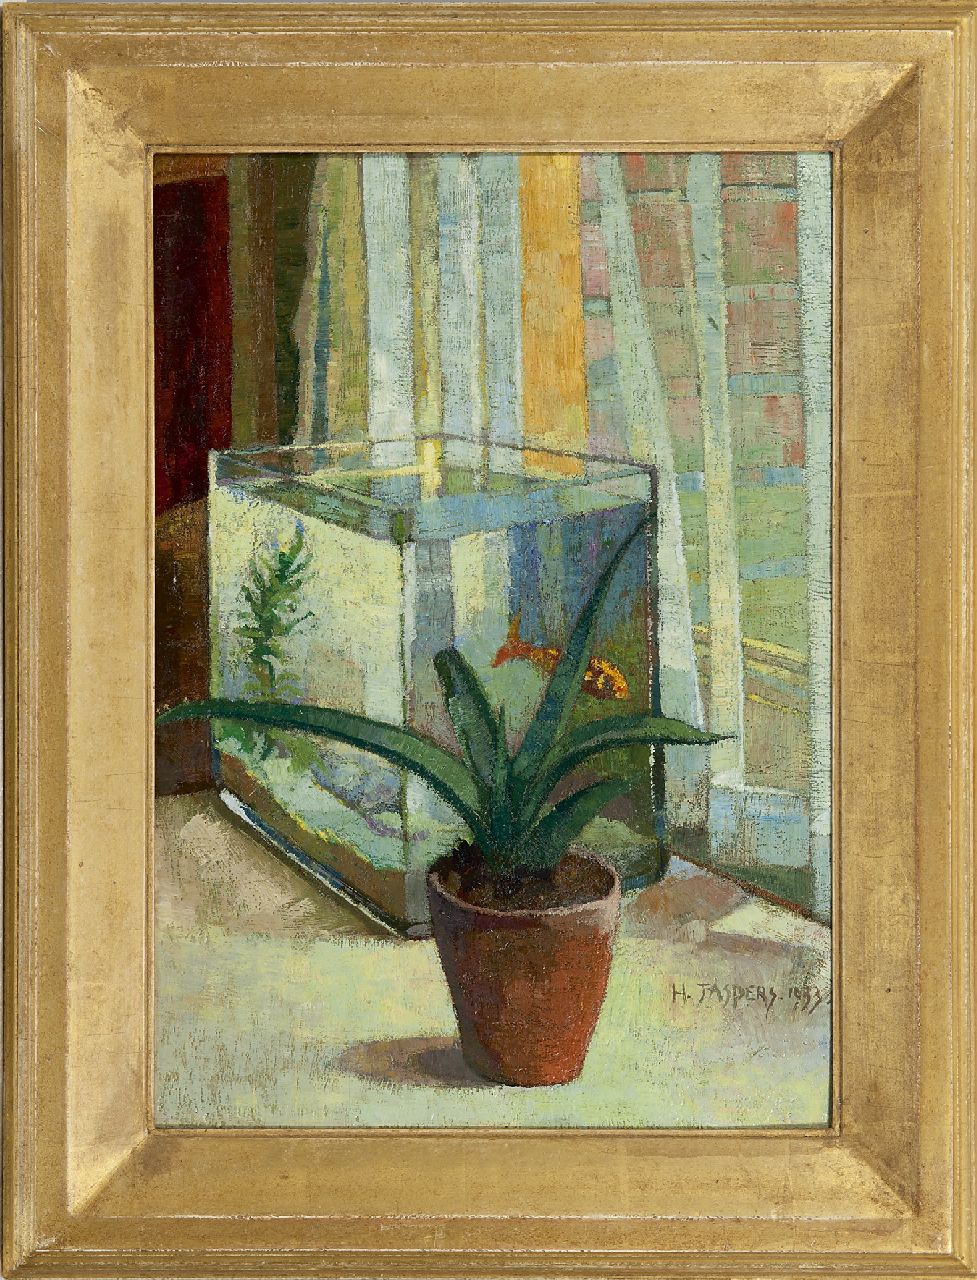 Jaspers H.T.  | Hendrik Theodorus 'Henk' Jaspers | Paintings offered for sale | Still life with an aquarium, oil on panel 46.5 x 33.0 cm, signed l.r. and dated 1933